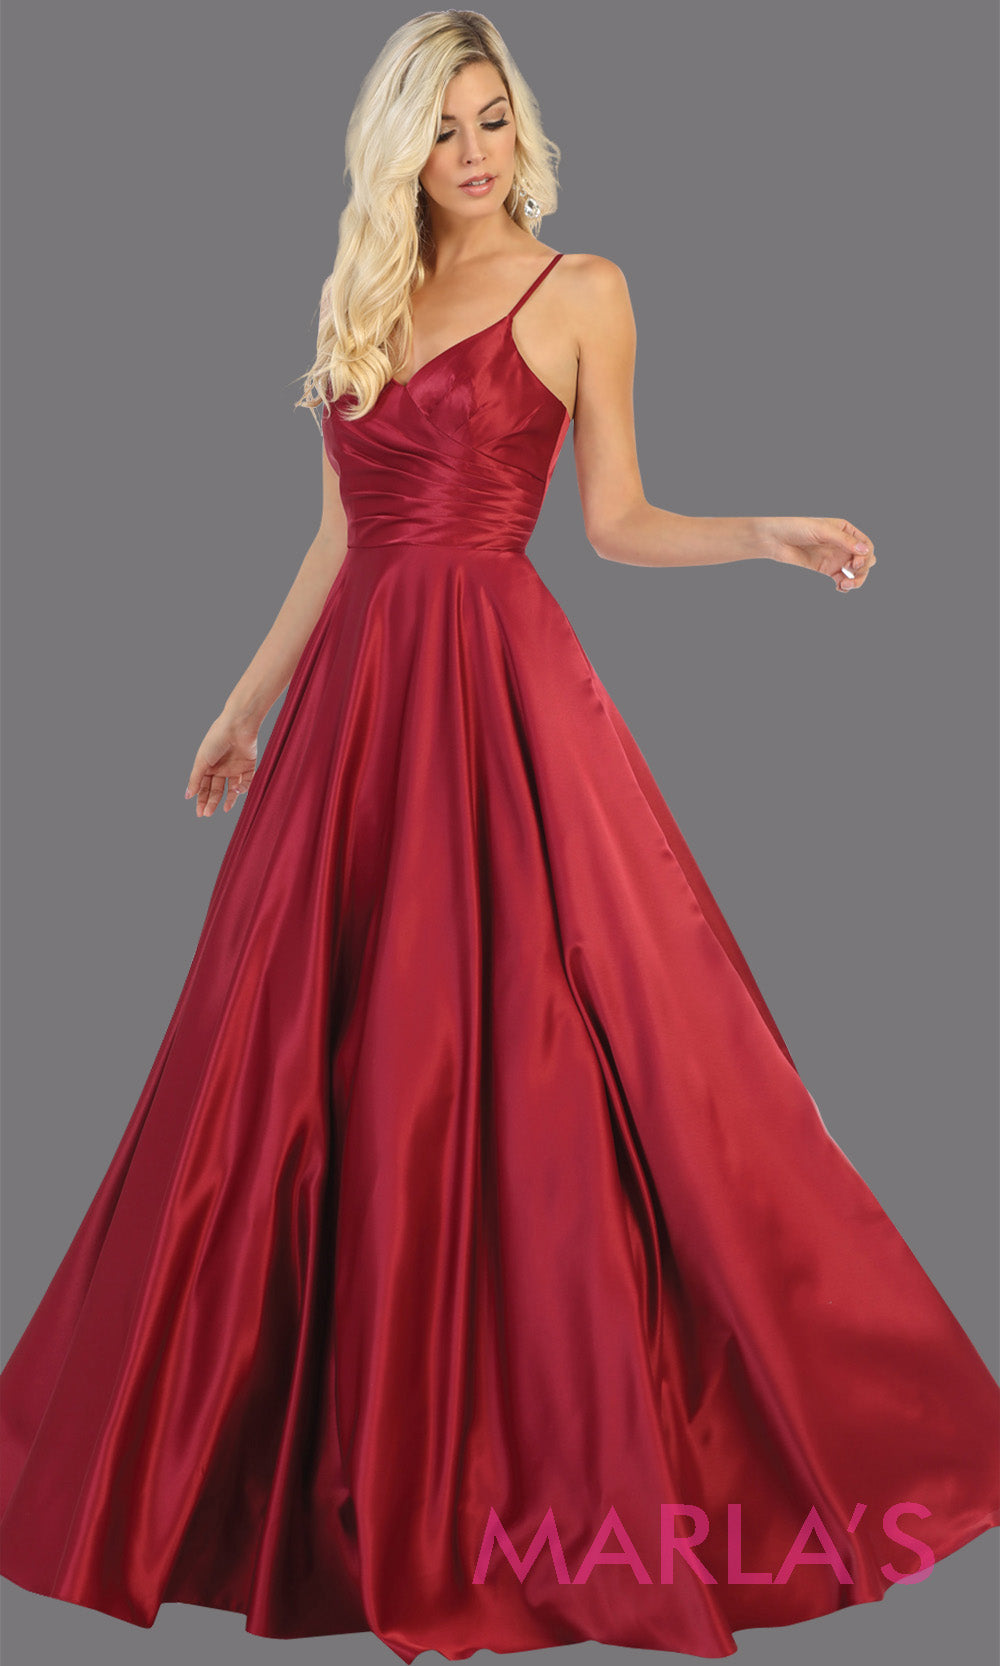 Long simple v neck burgundy red satin semi ballgown with pockets. This dark red flowy gown from mayqueen is perfect for prom, black tie event, engagement dress, formal party dress, plus size wedding guest dresses, indowestern party dress